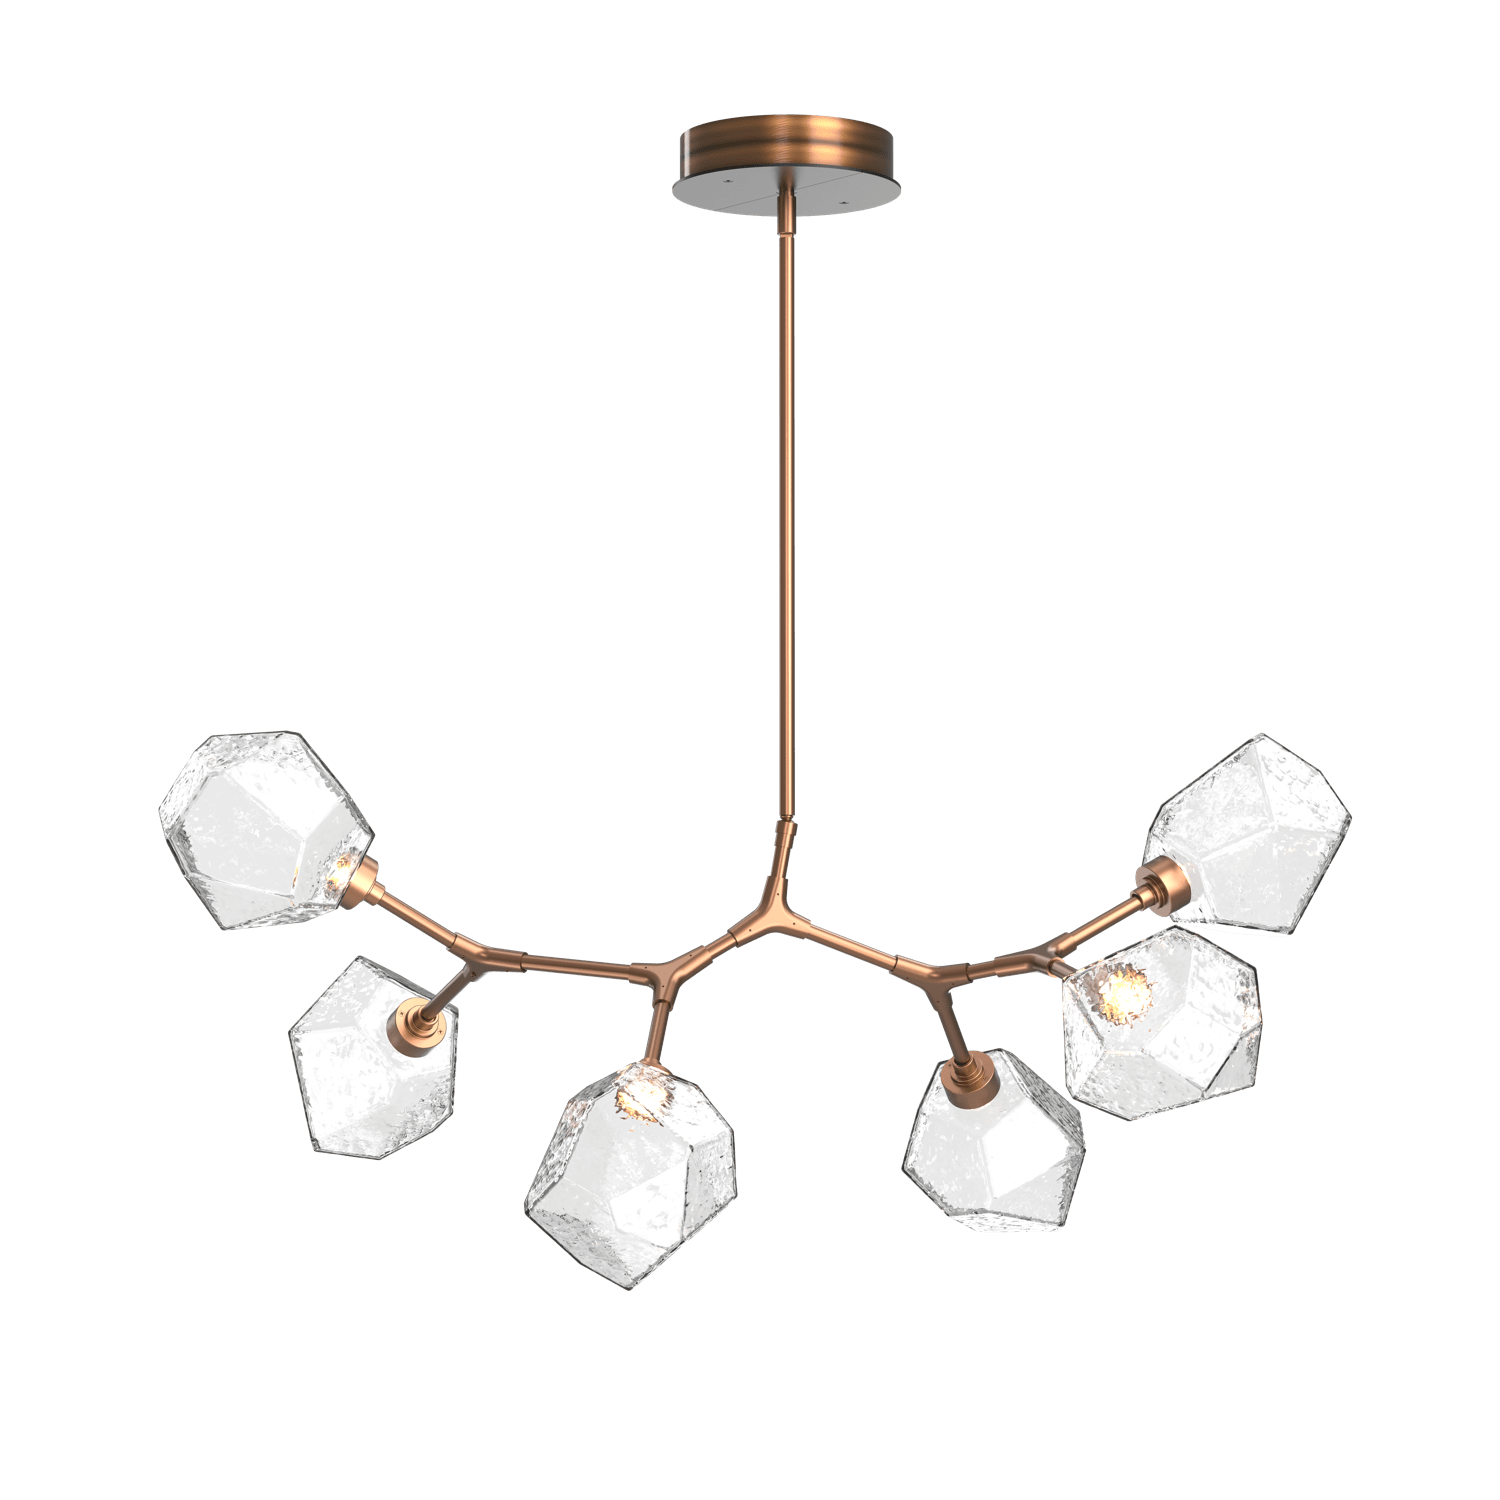 PLB0039-BA-RB-C-Hammerton-Studio-Gem-6-light-modern-branch-chandelier-with-oil-rubbed-bronze-finish-and-clear-blown-glass-shades-and-LED-lamping